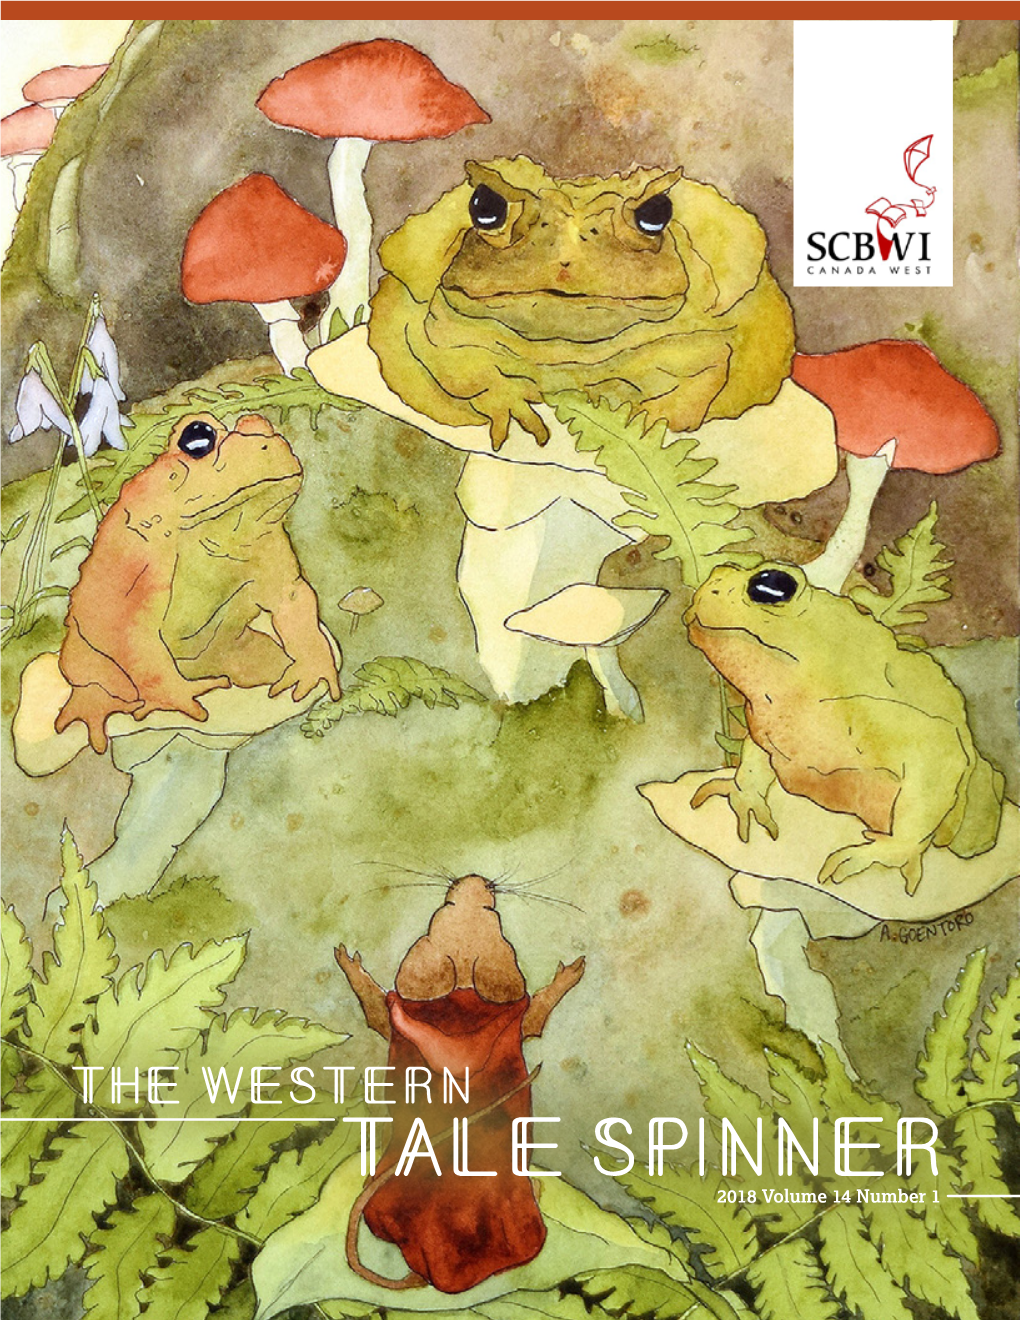 Tale Spinner 2018 Volume 14 Number 1 the Western Tale Spinner 01